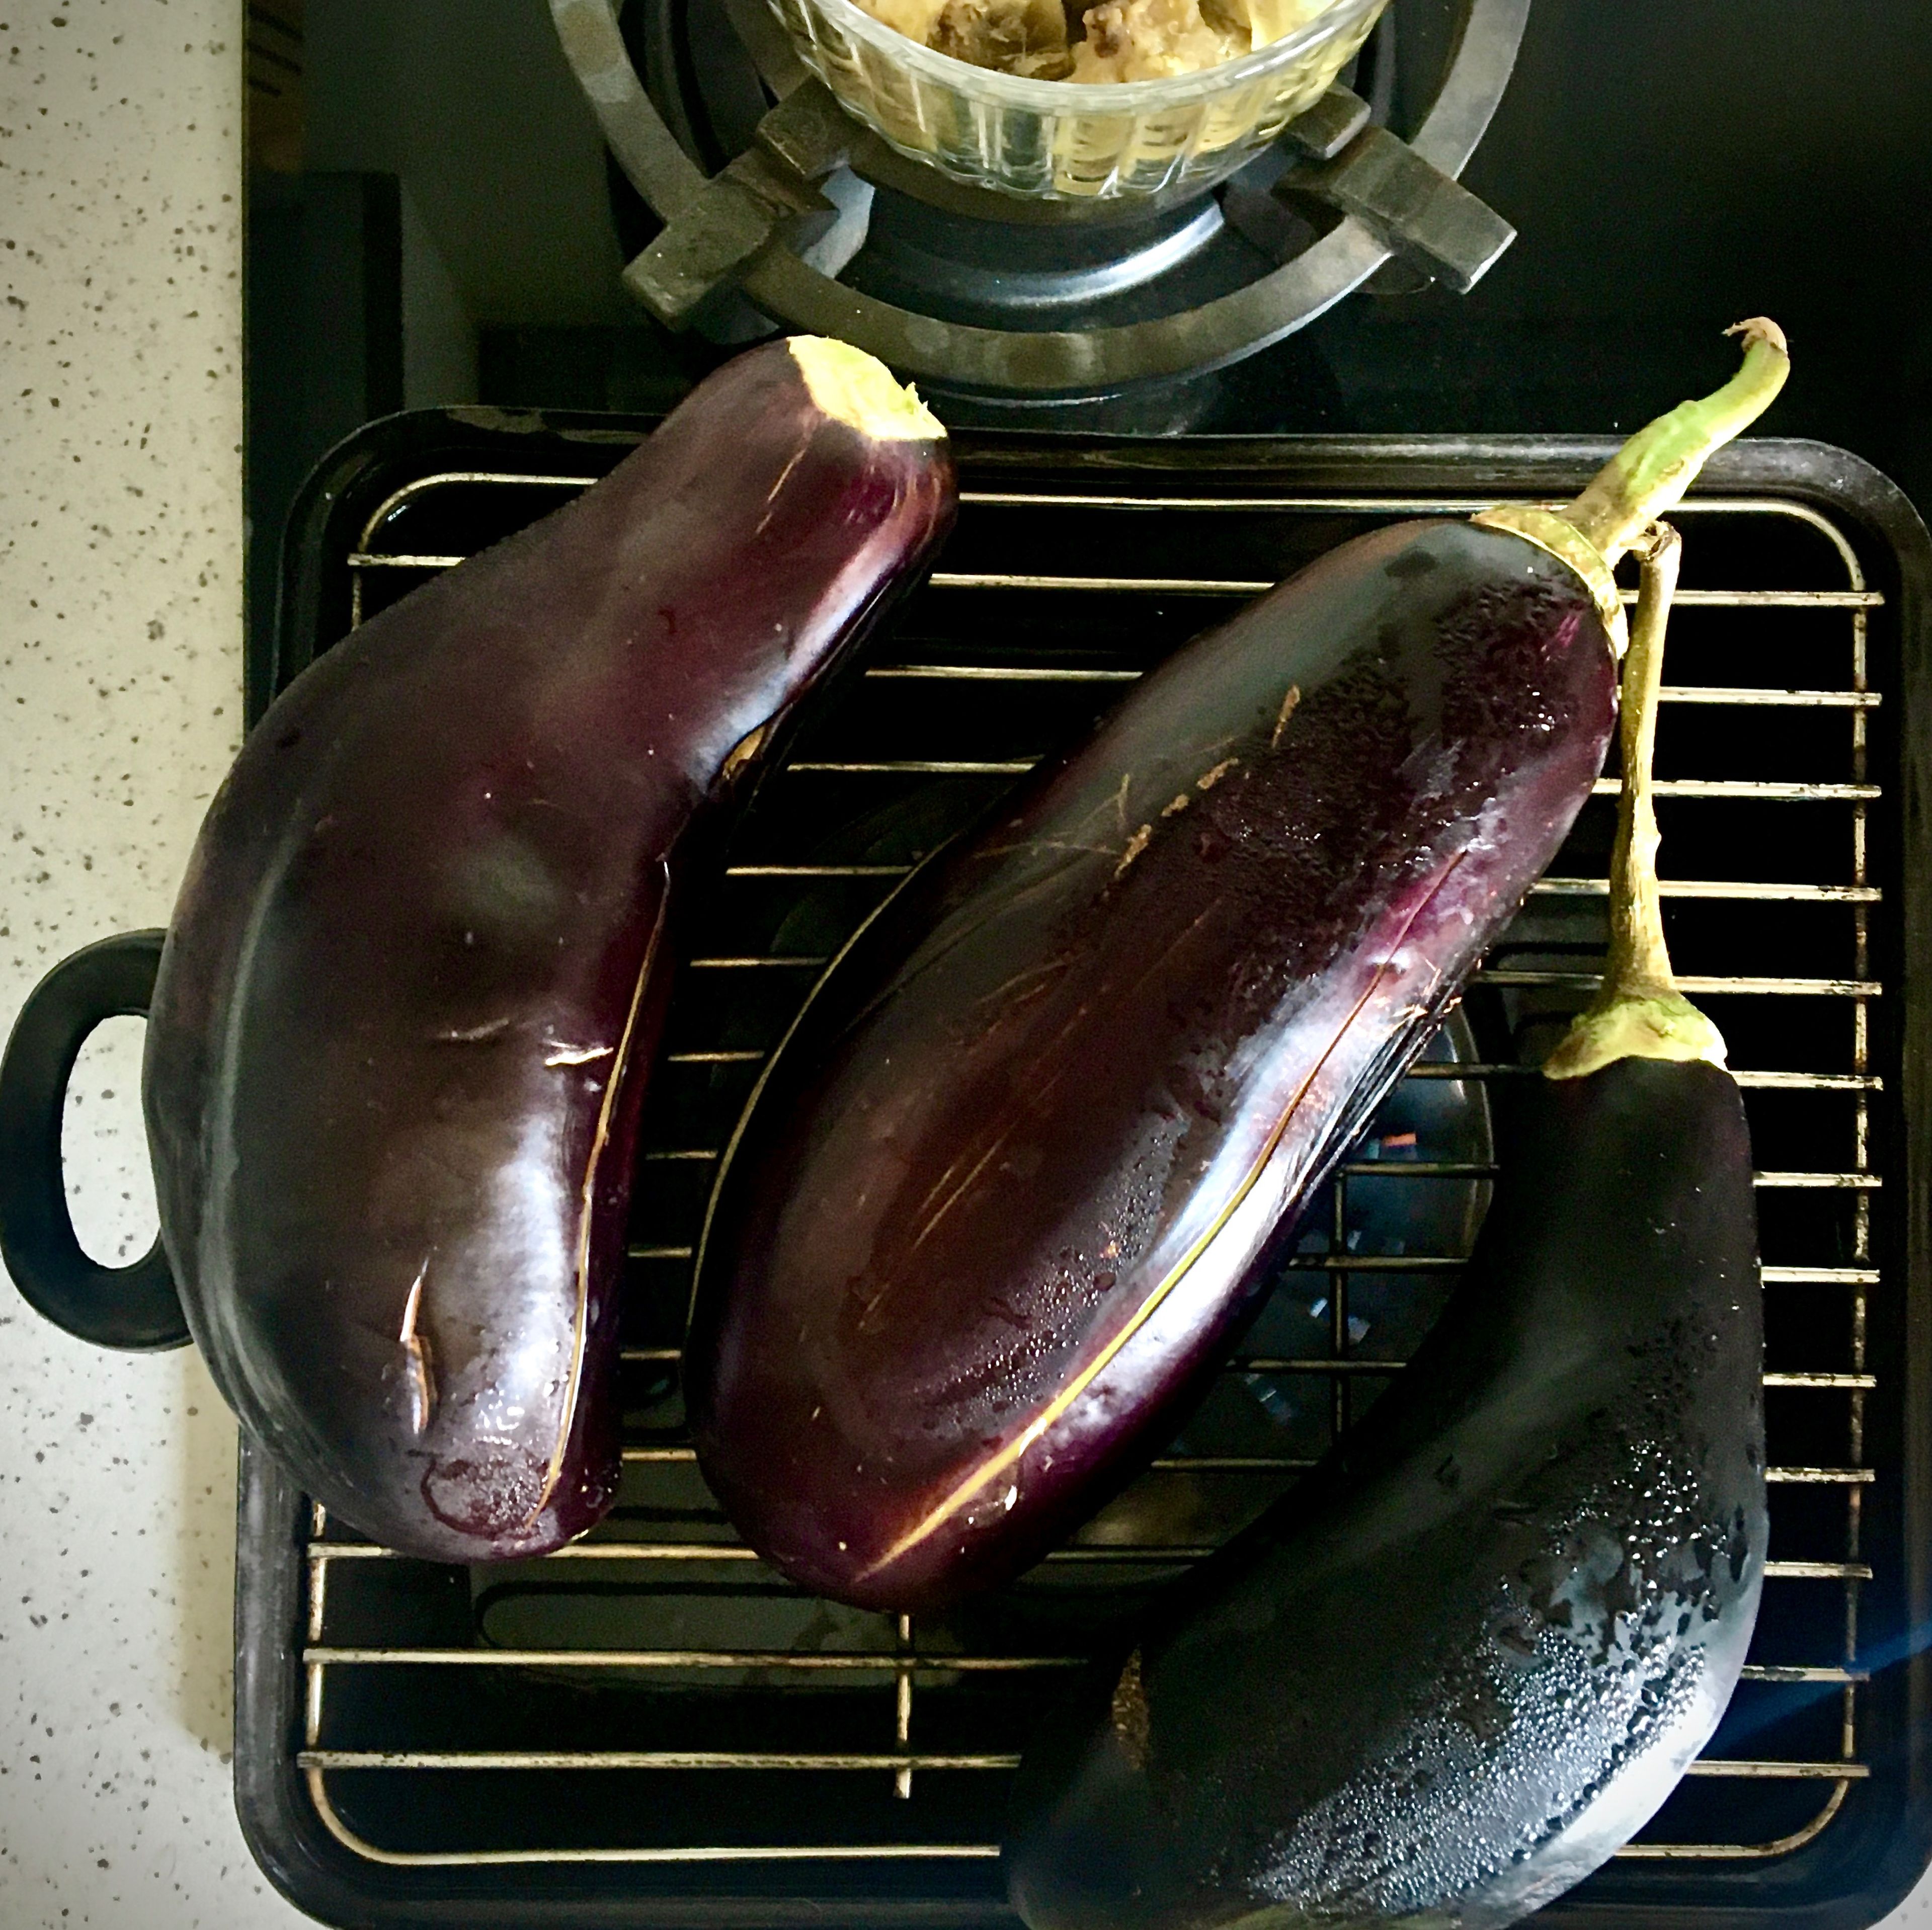 My usual way for burning/smoking things like eggplants is using the griddled pot over gas hobs with medium-high flames. Cutting some scores over the eggplants’ flesh helps their steam comes out and prevent them from bursting.